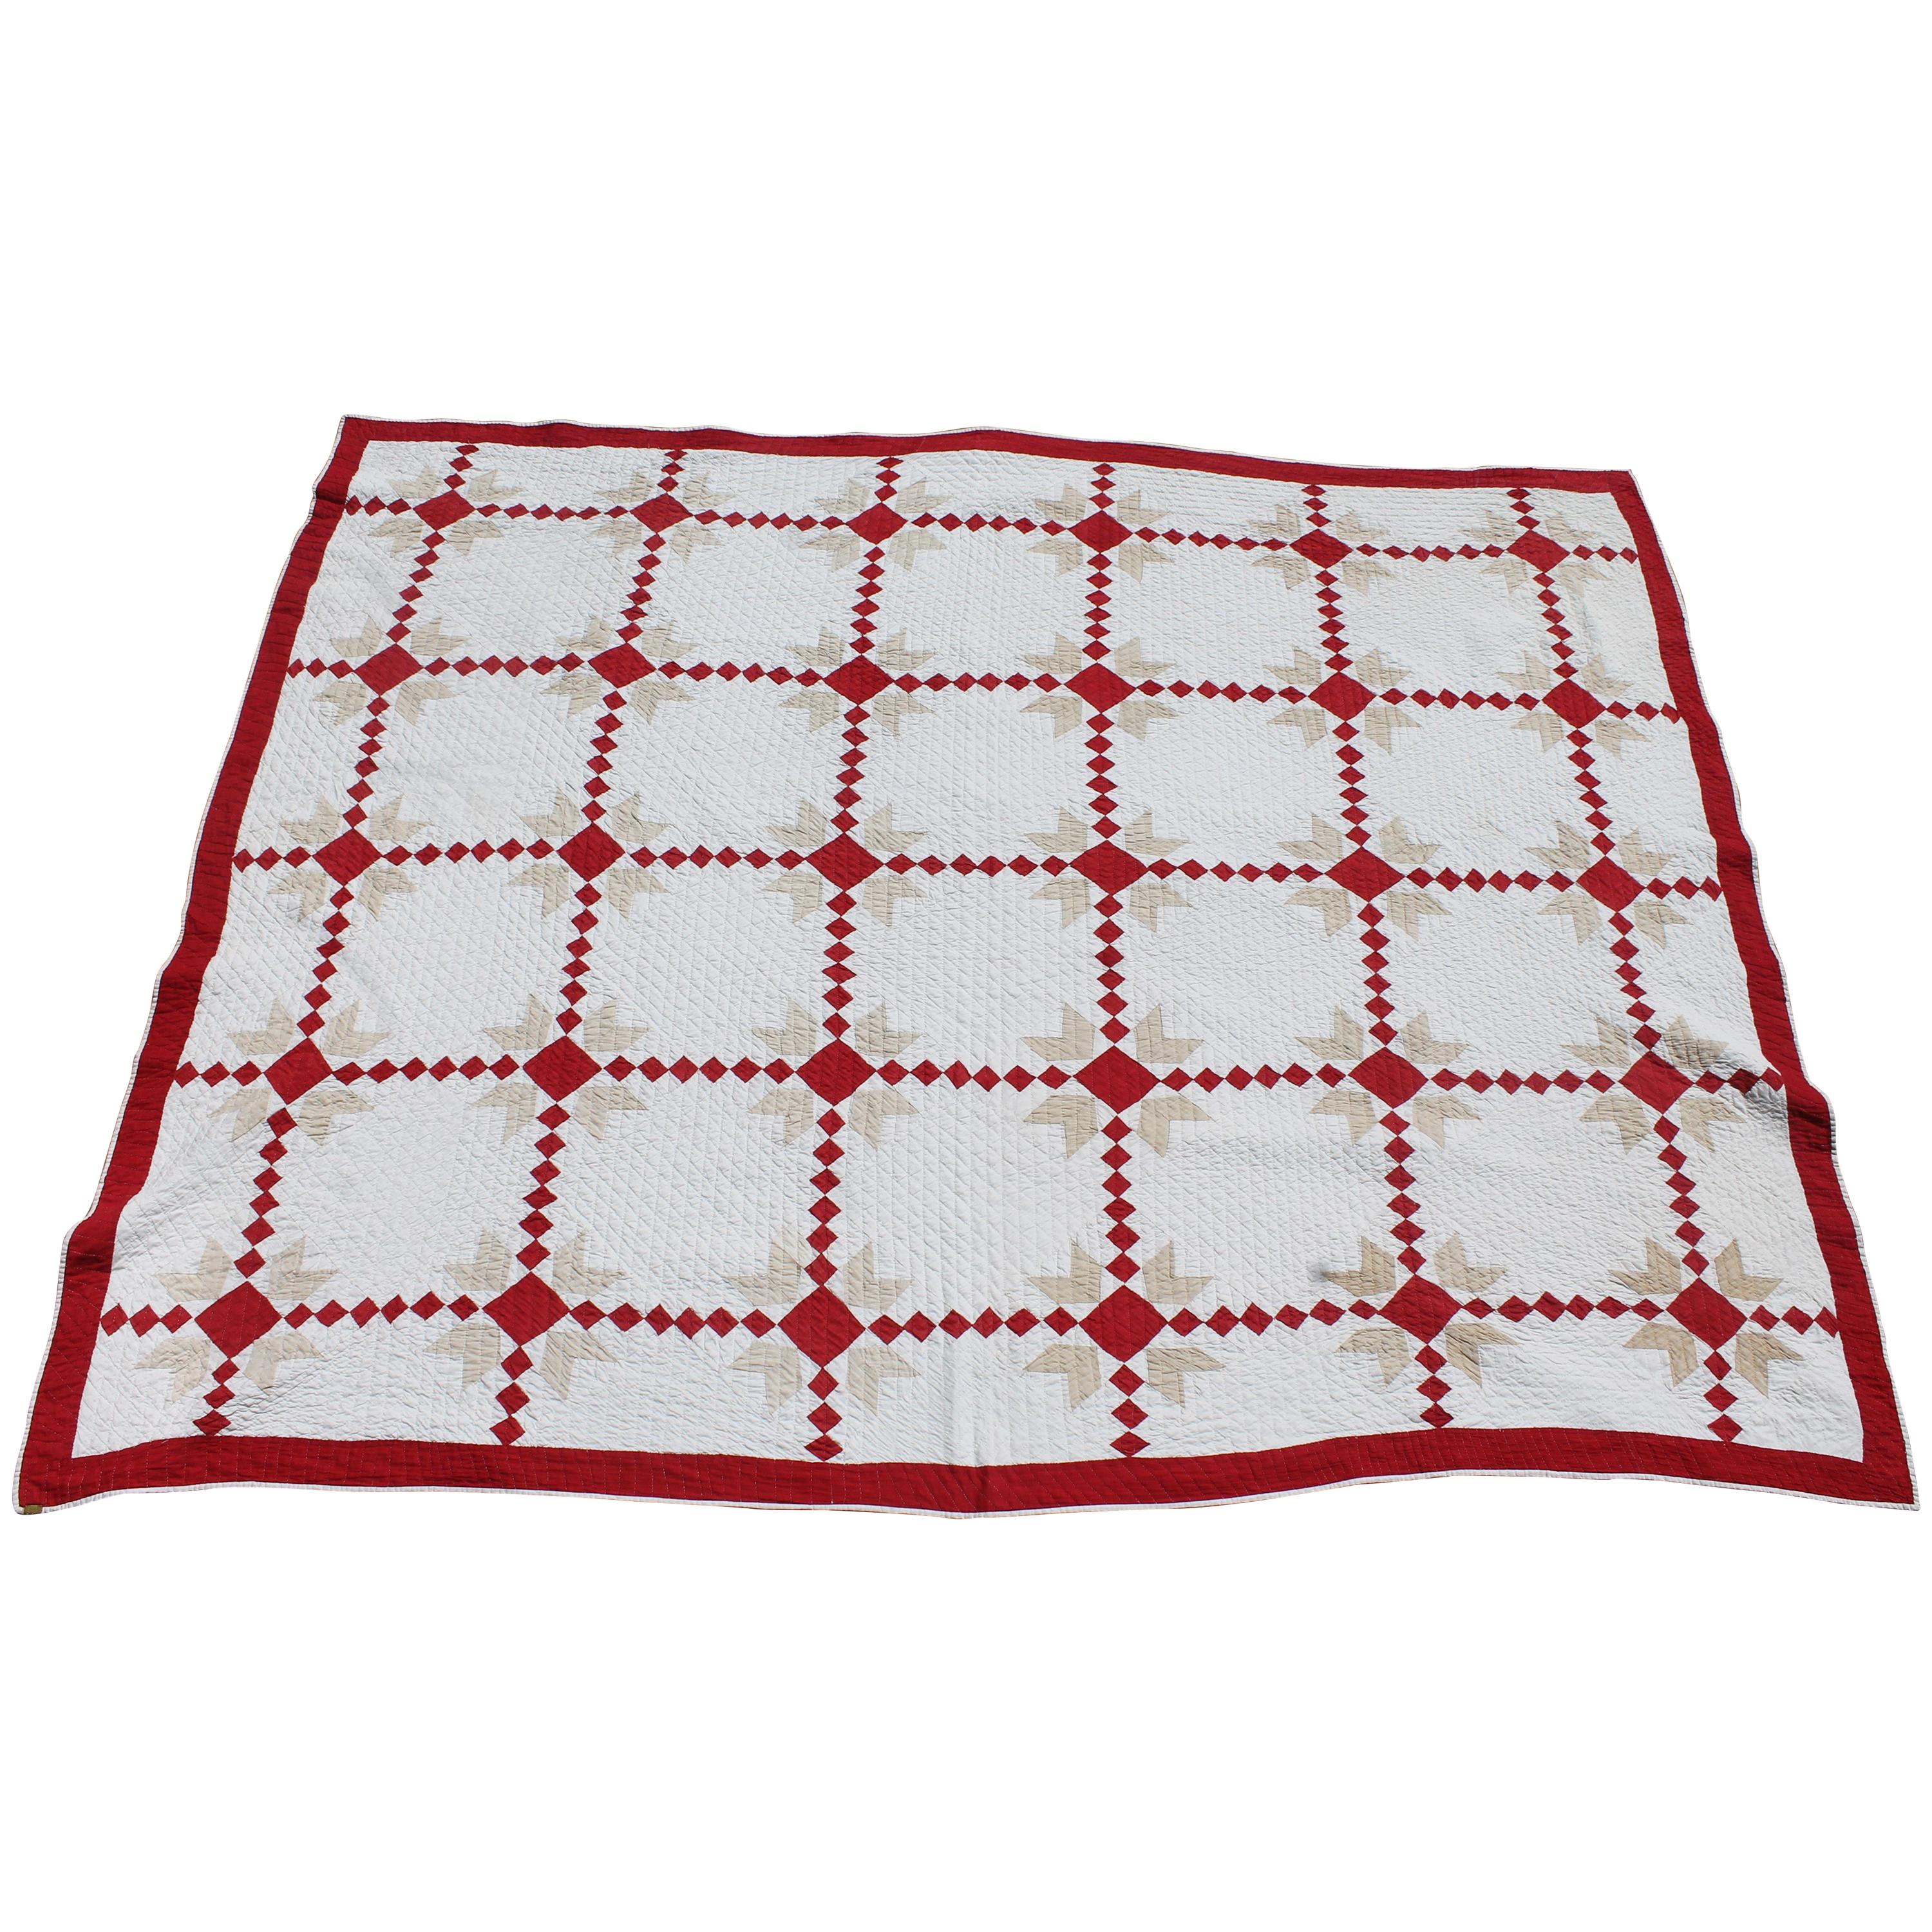 19th Century Red & White Quilt with Postage Stamp Chain Pattern 